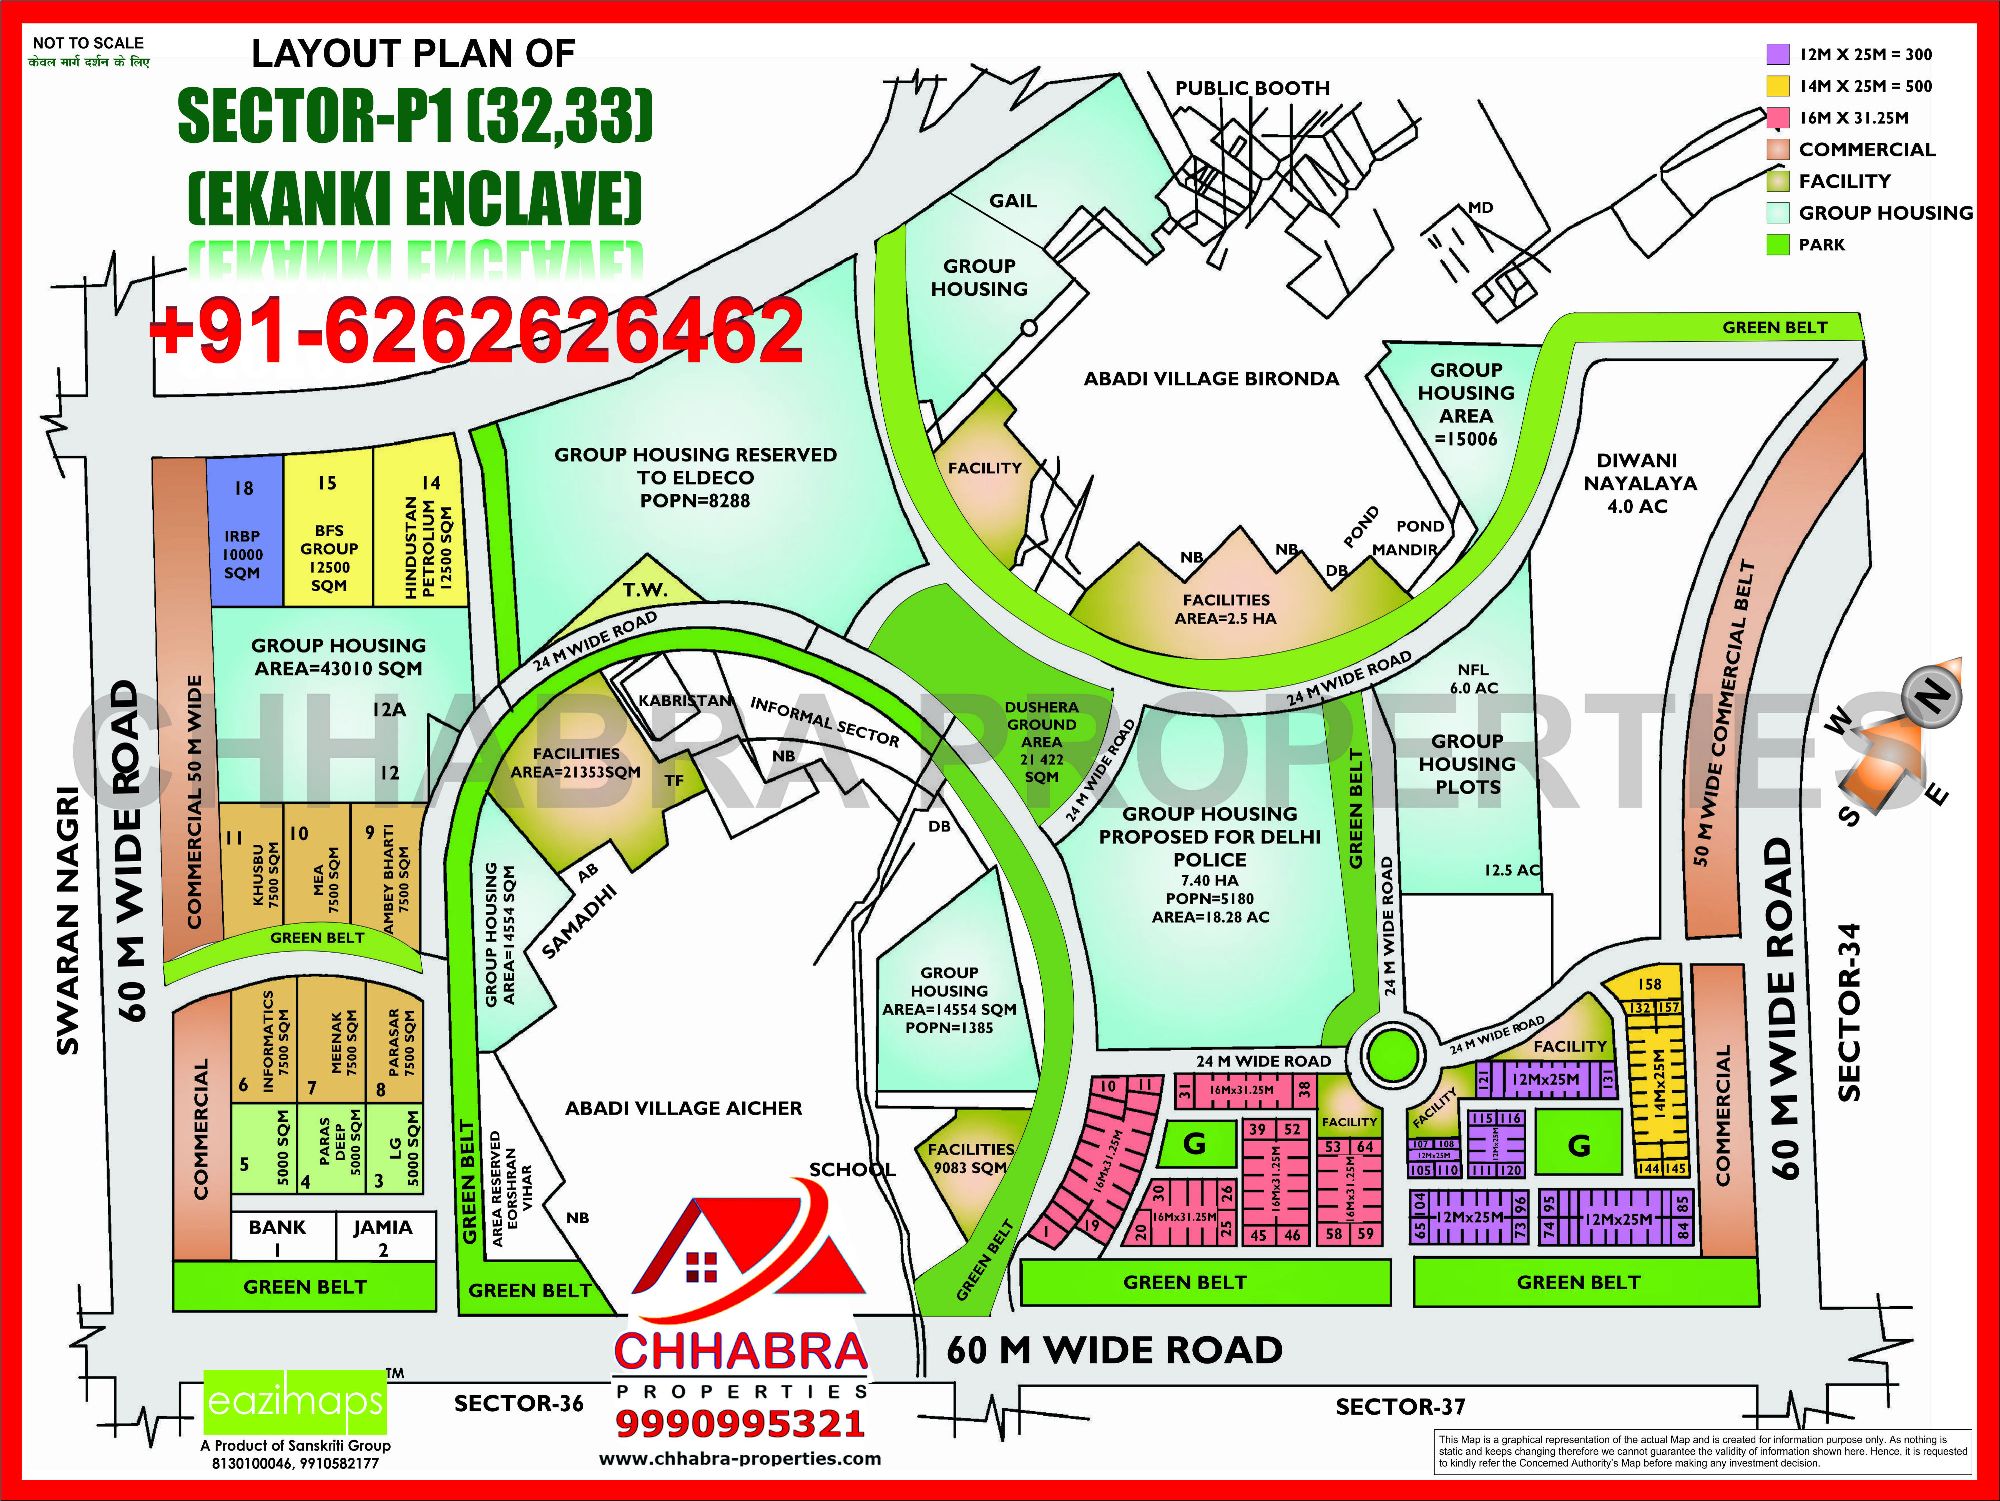 layout plan for sector p13233 ekanki enclave hd map